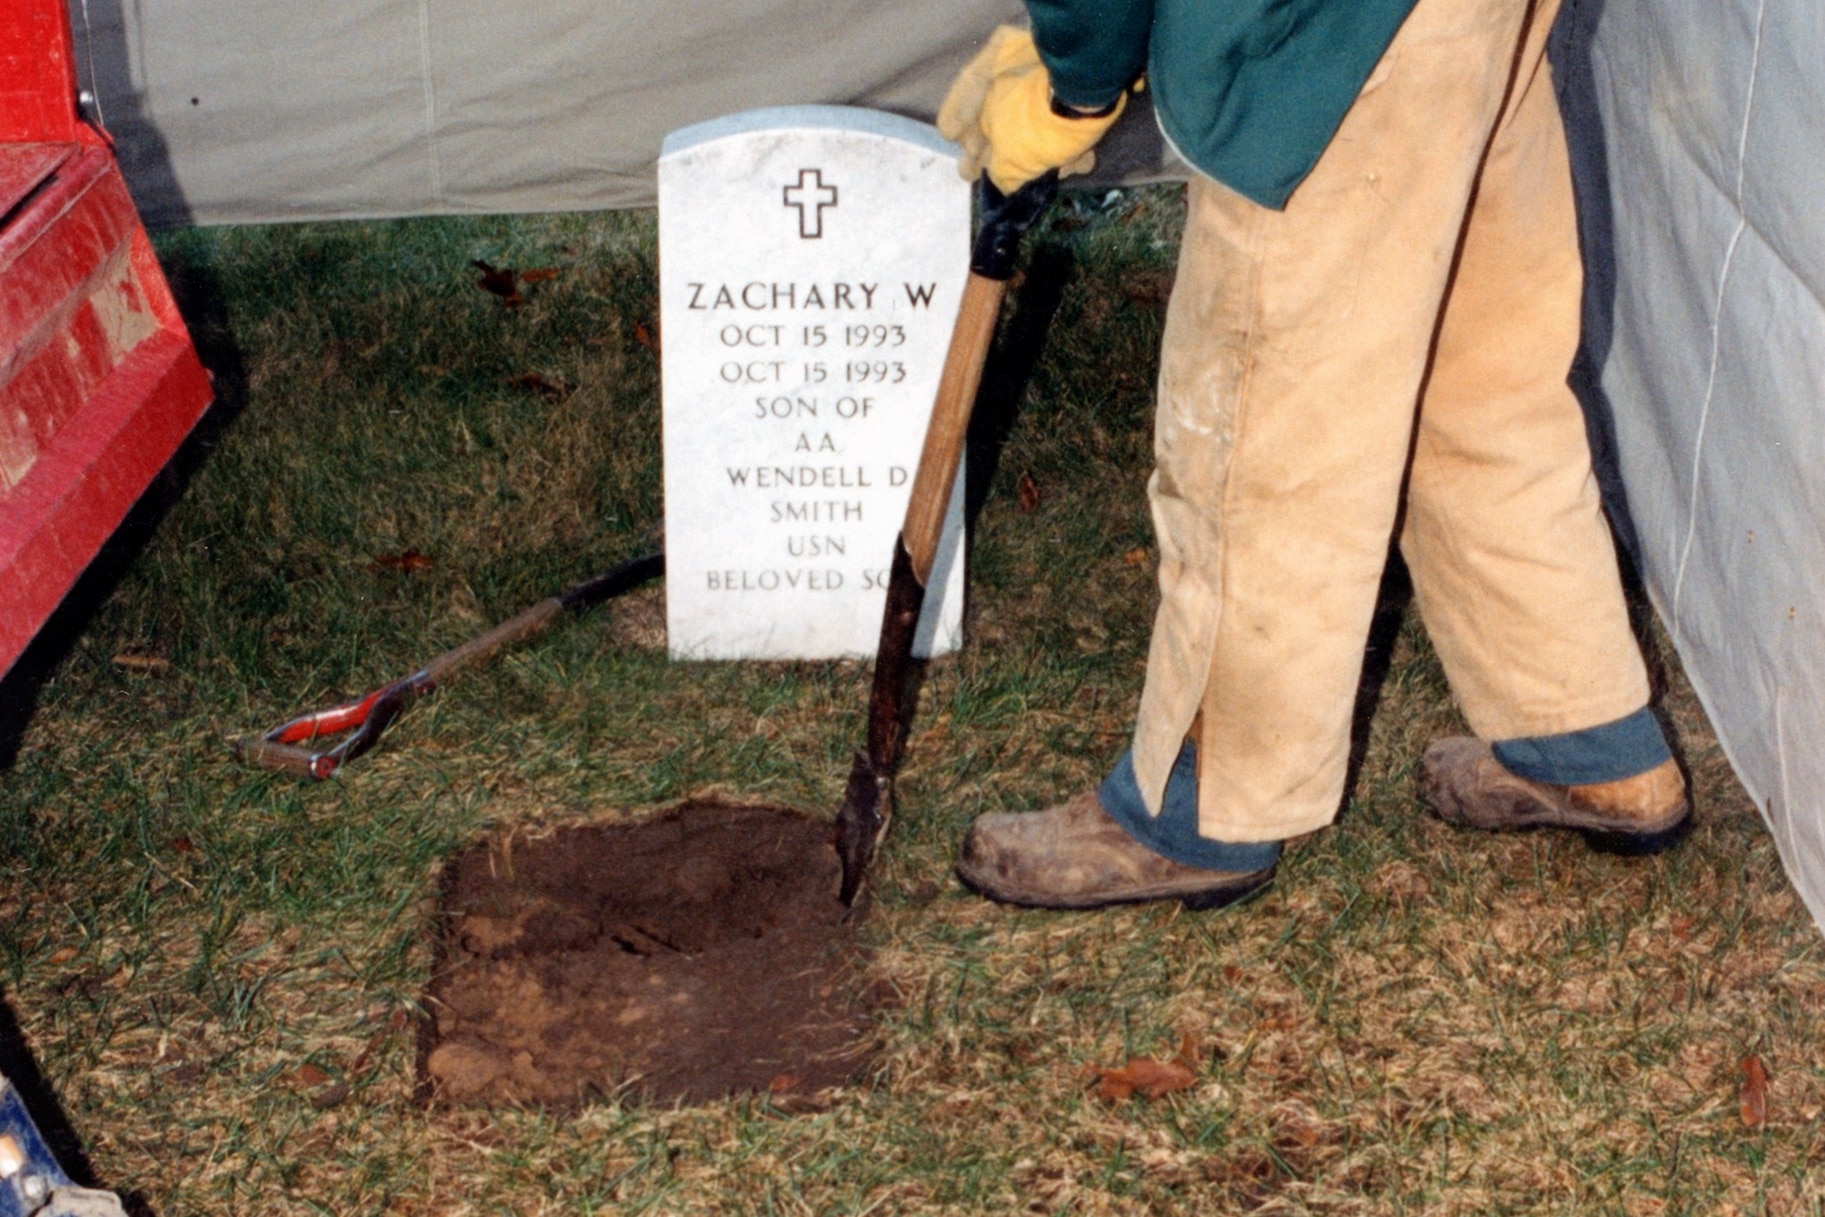 A police officer digs up a grave